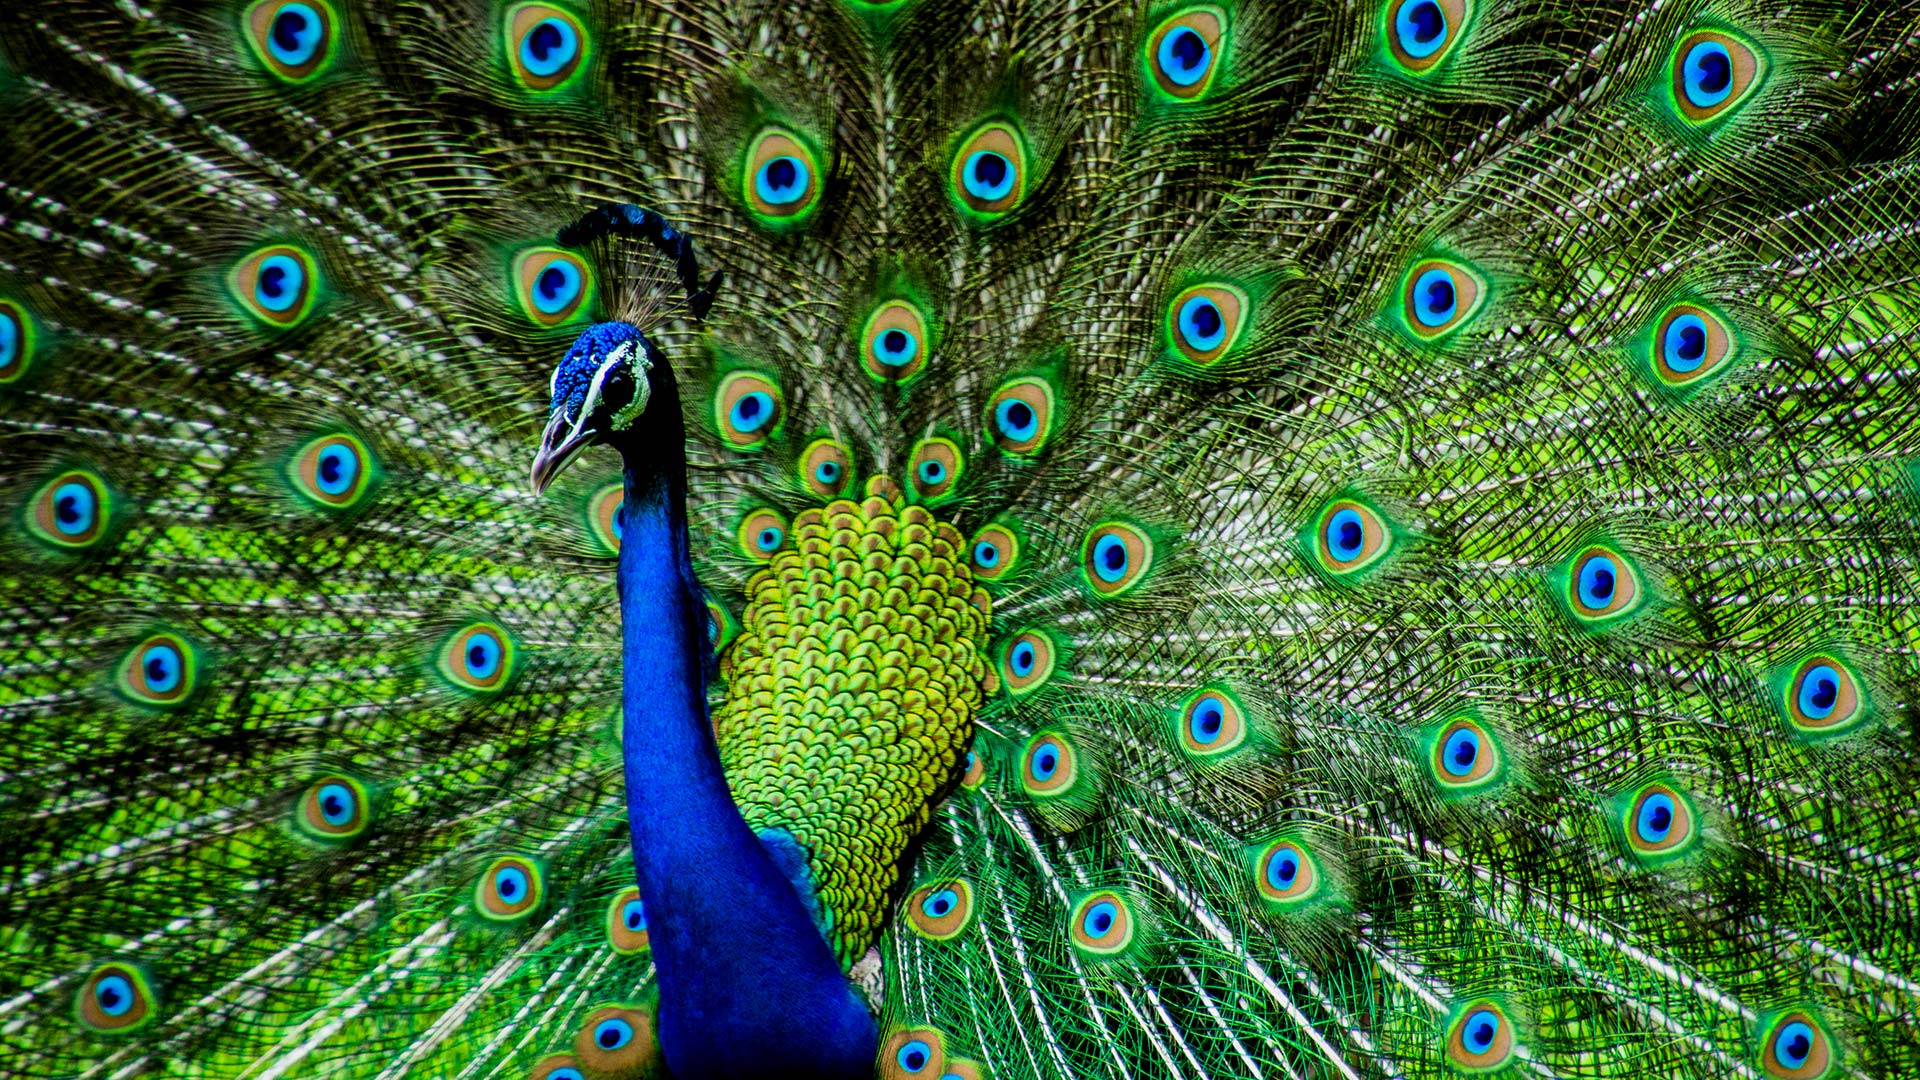 Beautiful peacock with their feathers spread out